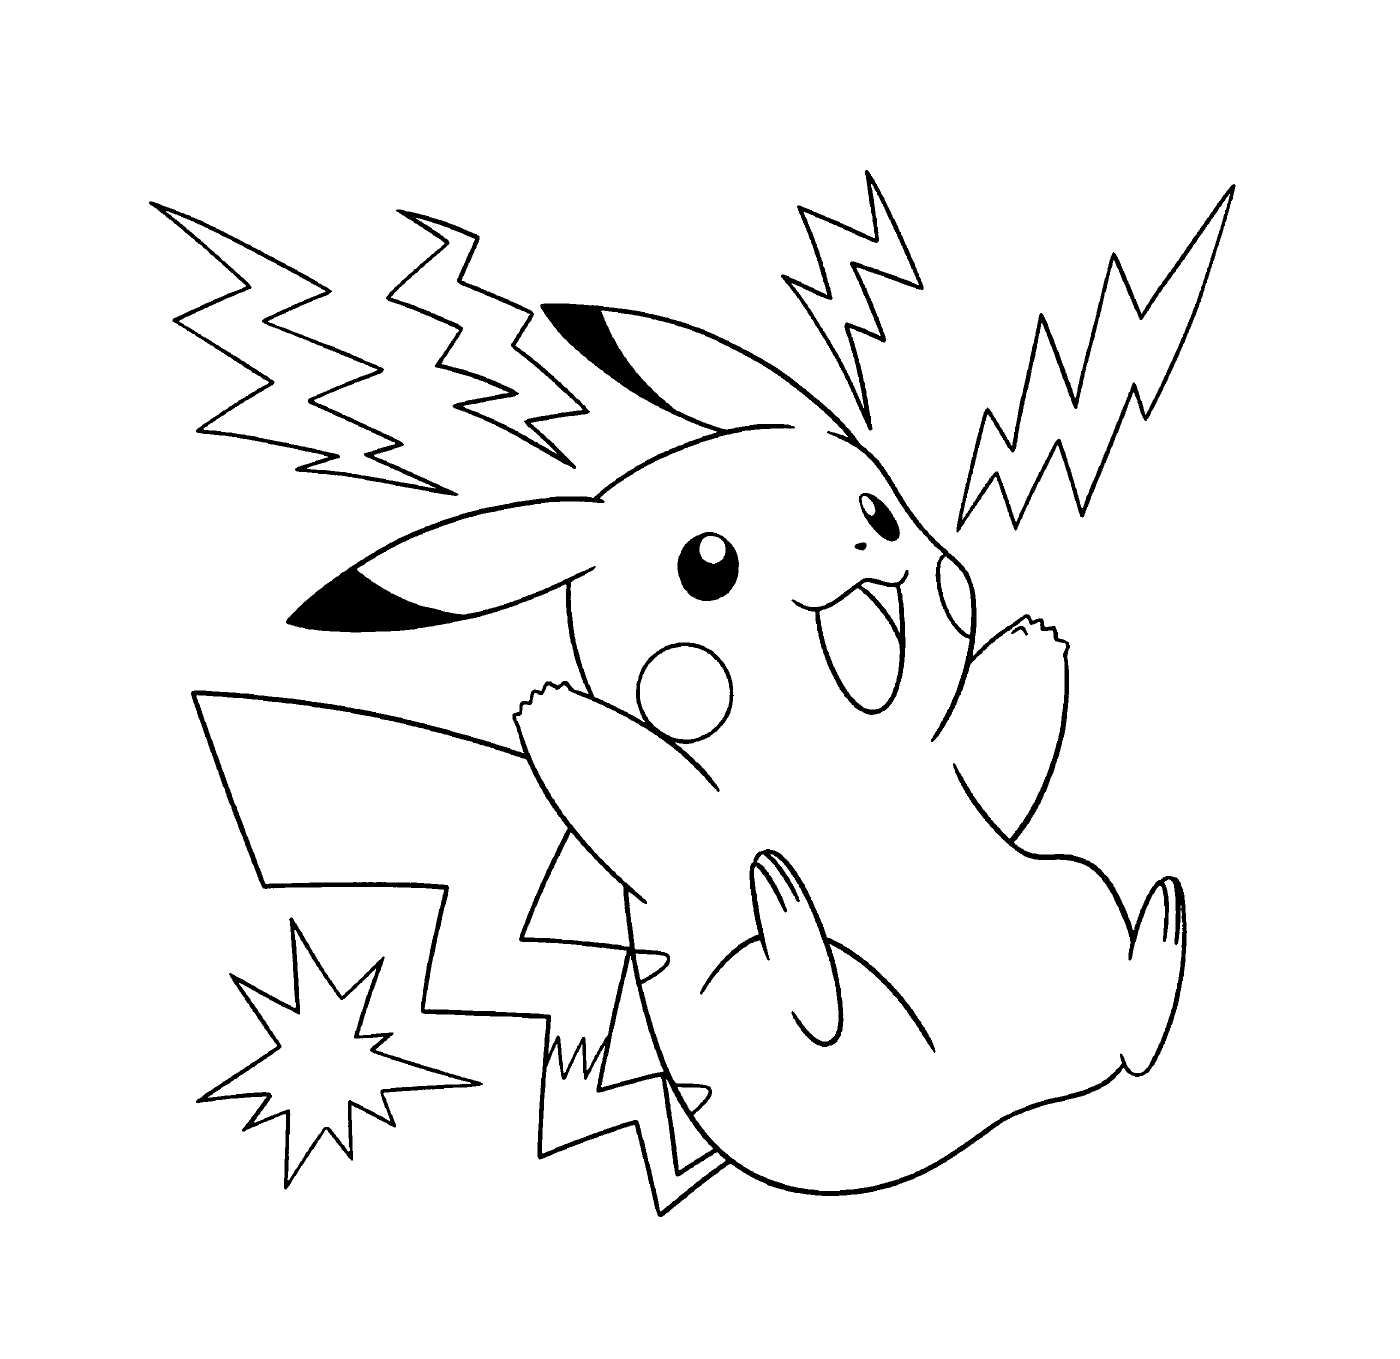  Pikachu, electric and energetic 